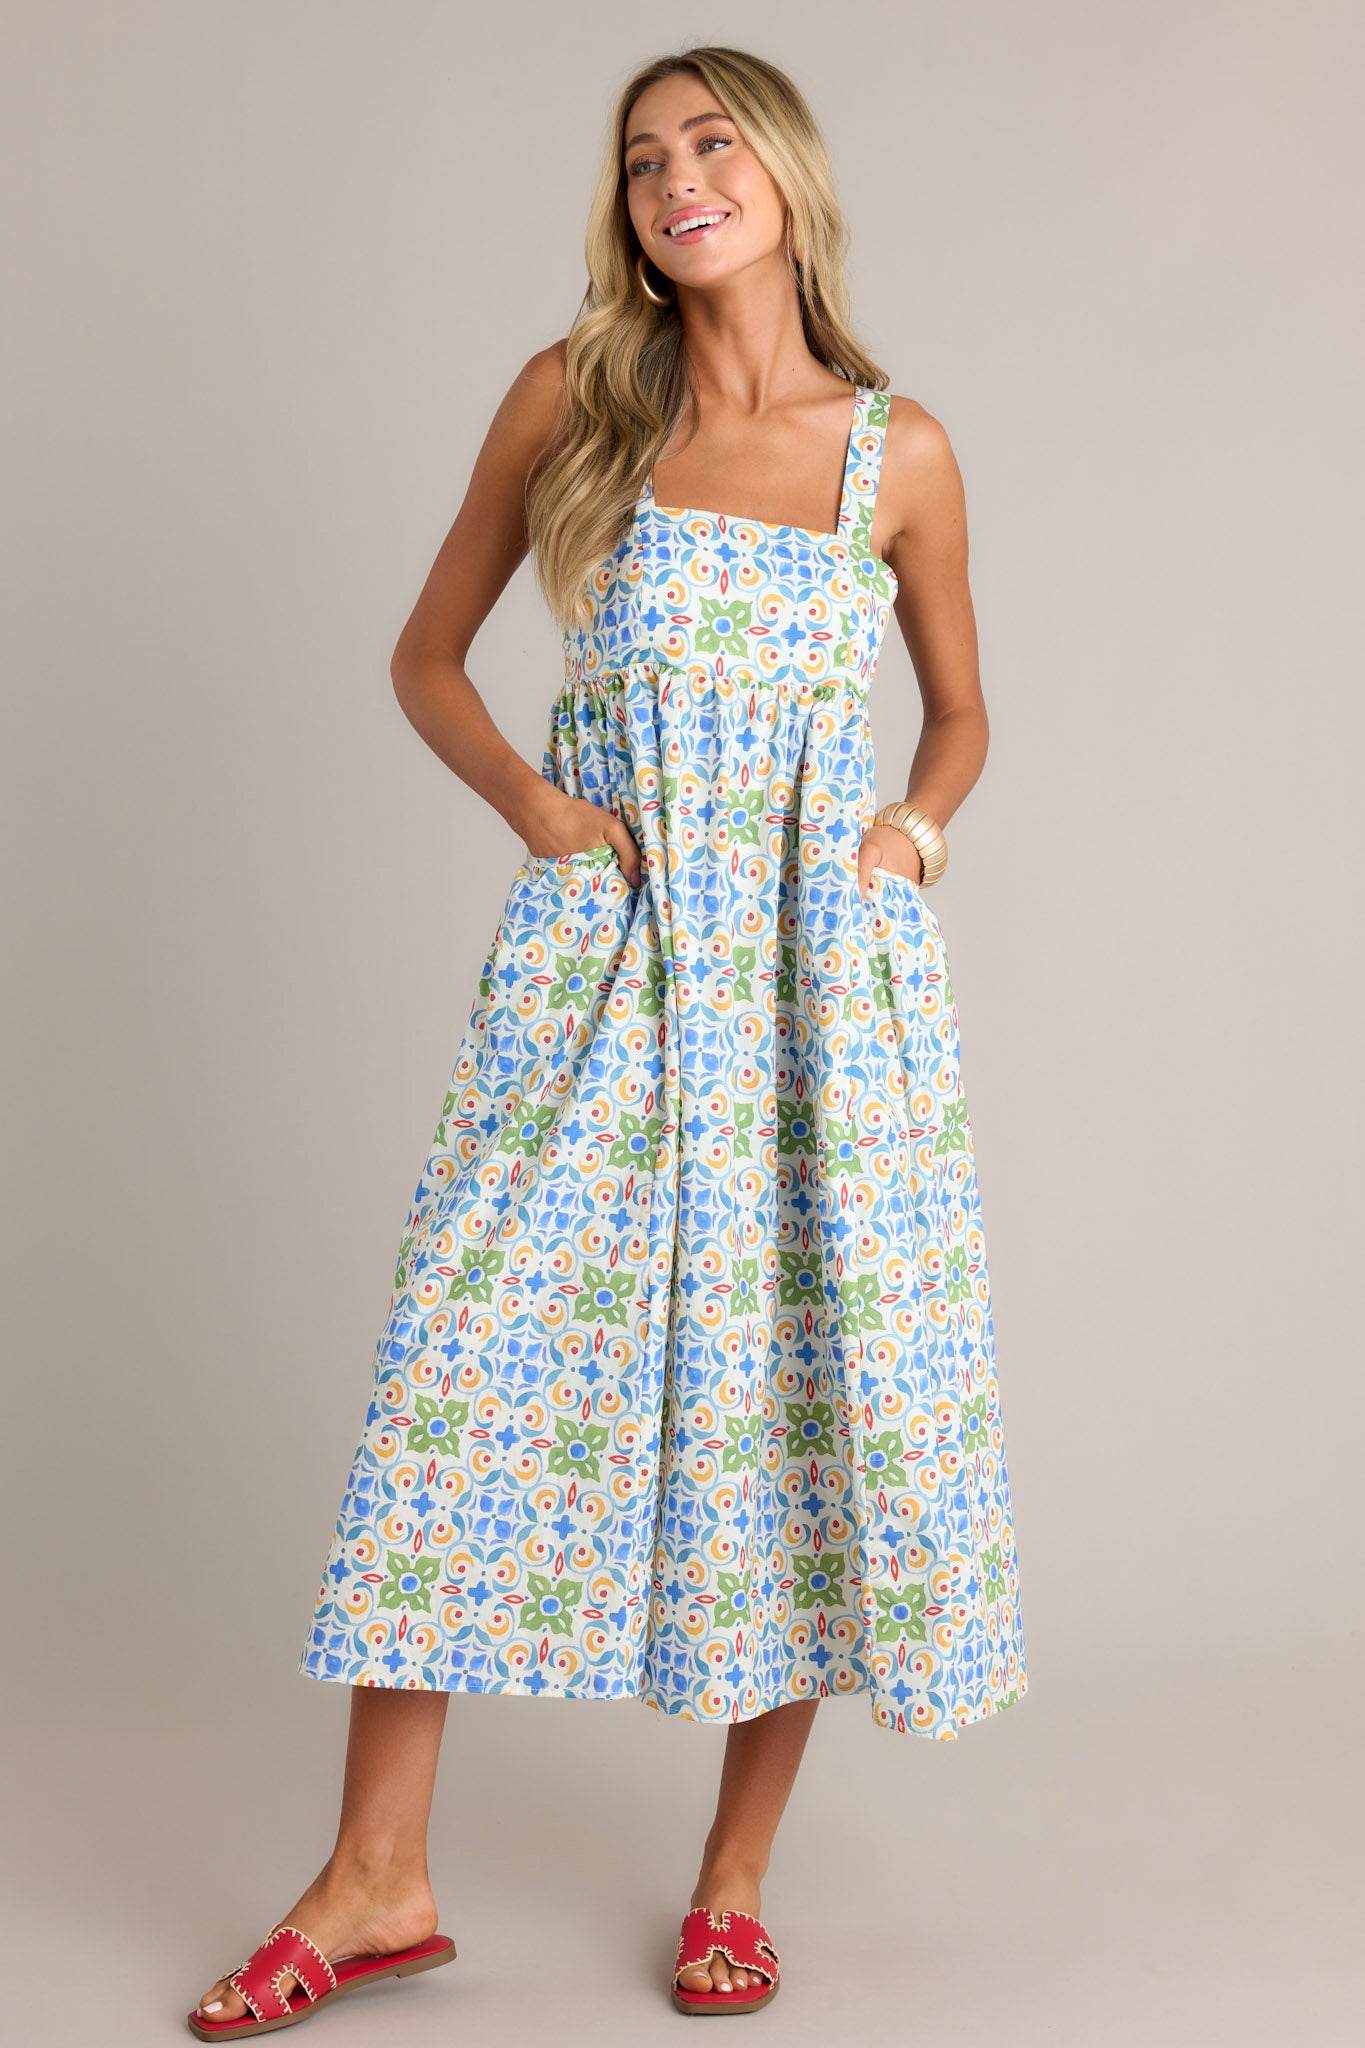 Angled full length view of a white midi dress with a square neckline, self-tie adjustable straps, a colorful pattern, functional hip pockets, and a flowing silhouette